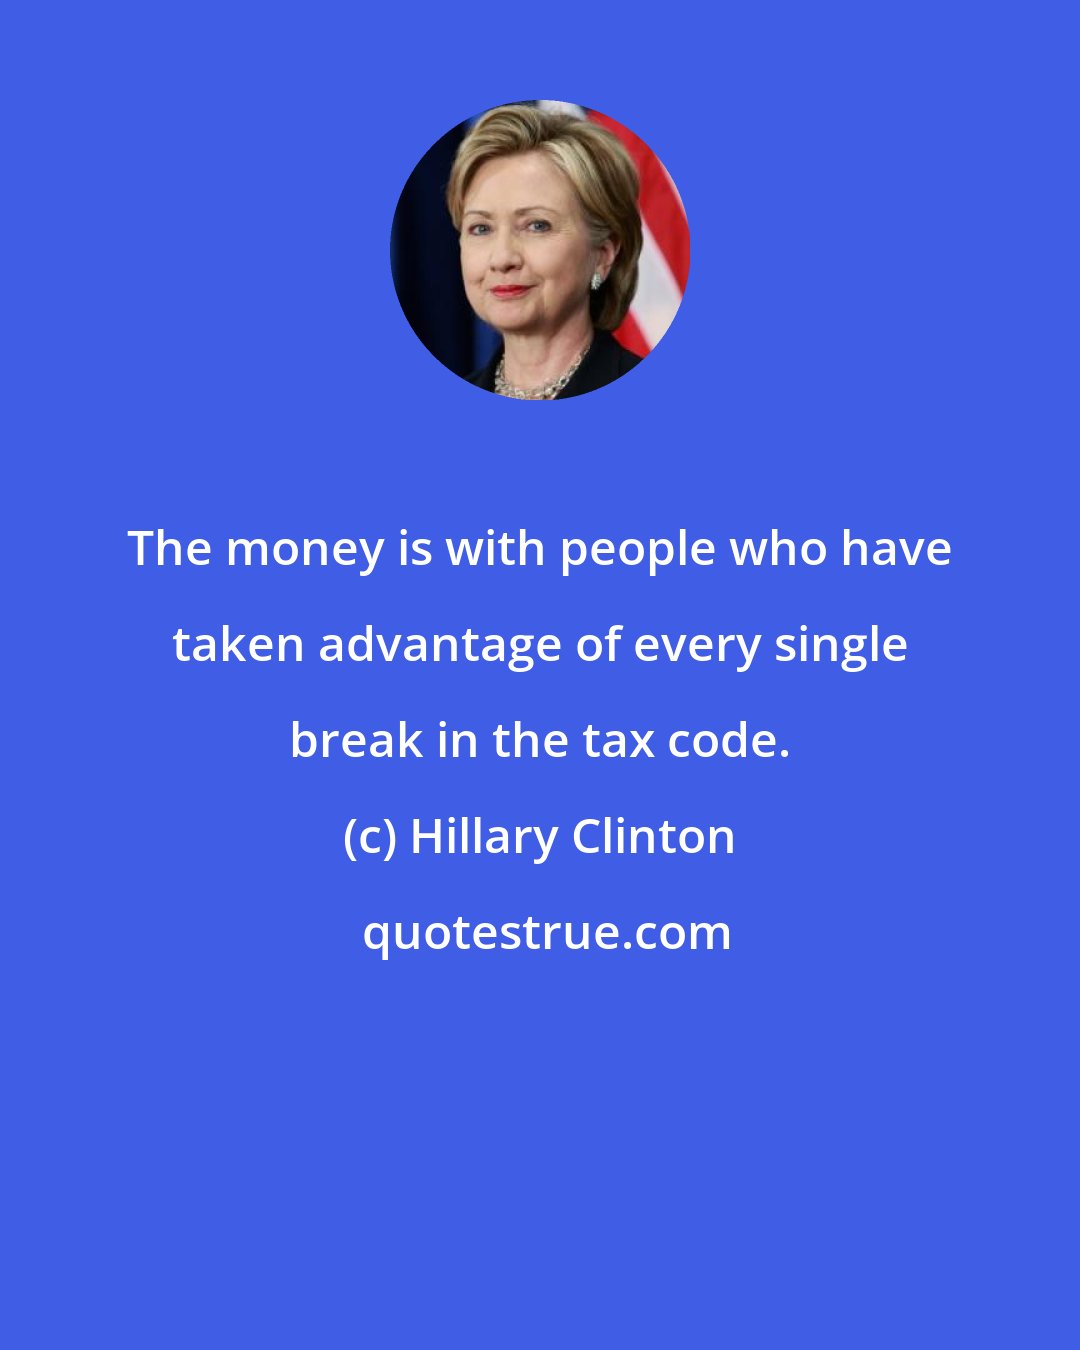 Hillary Clinton: The money is with people who have taken advantage of every single break in the tax code.